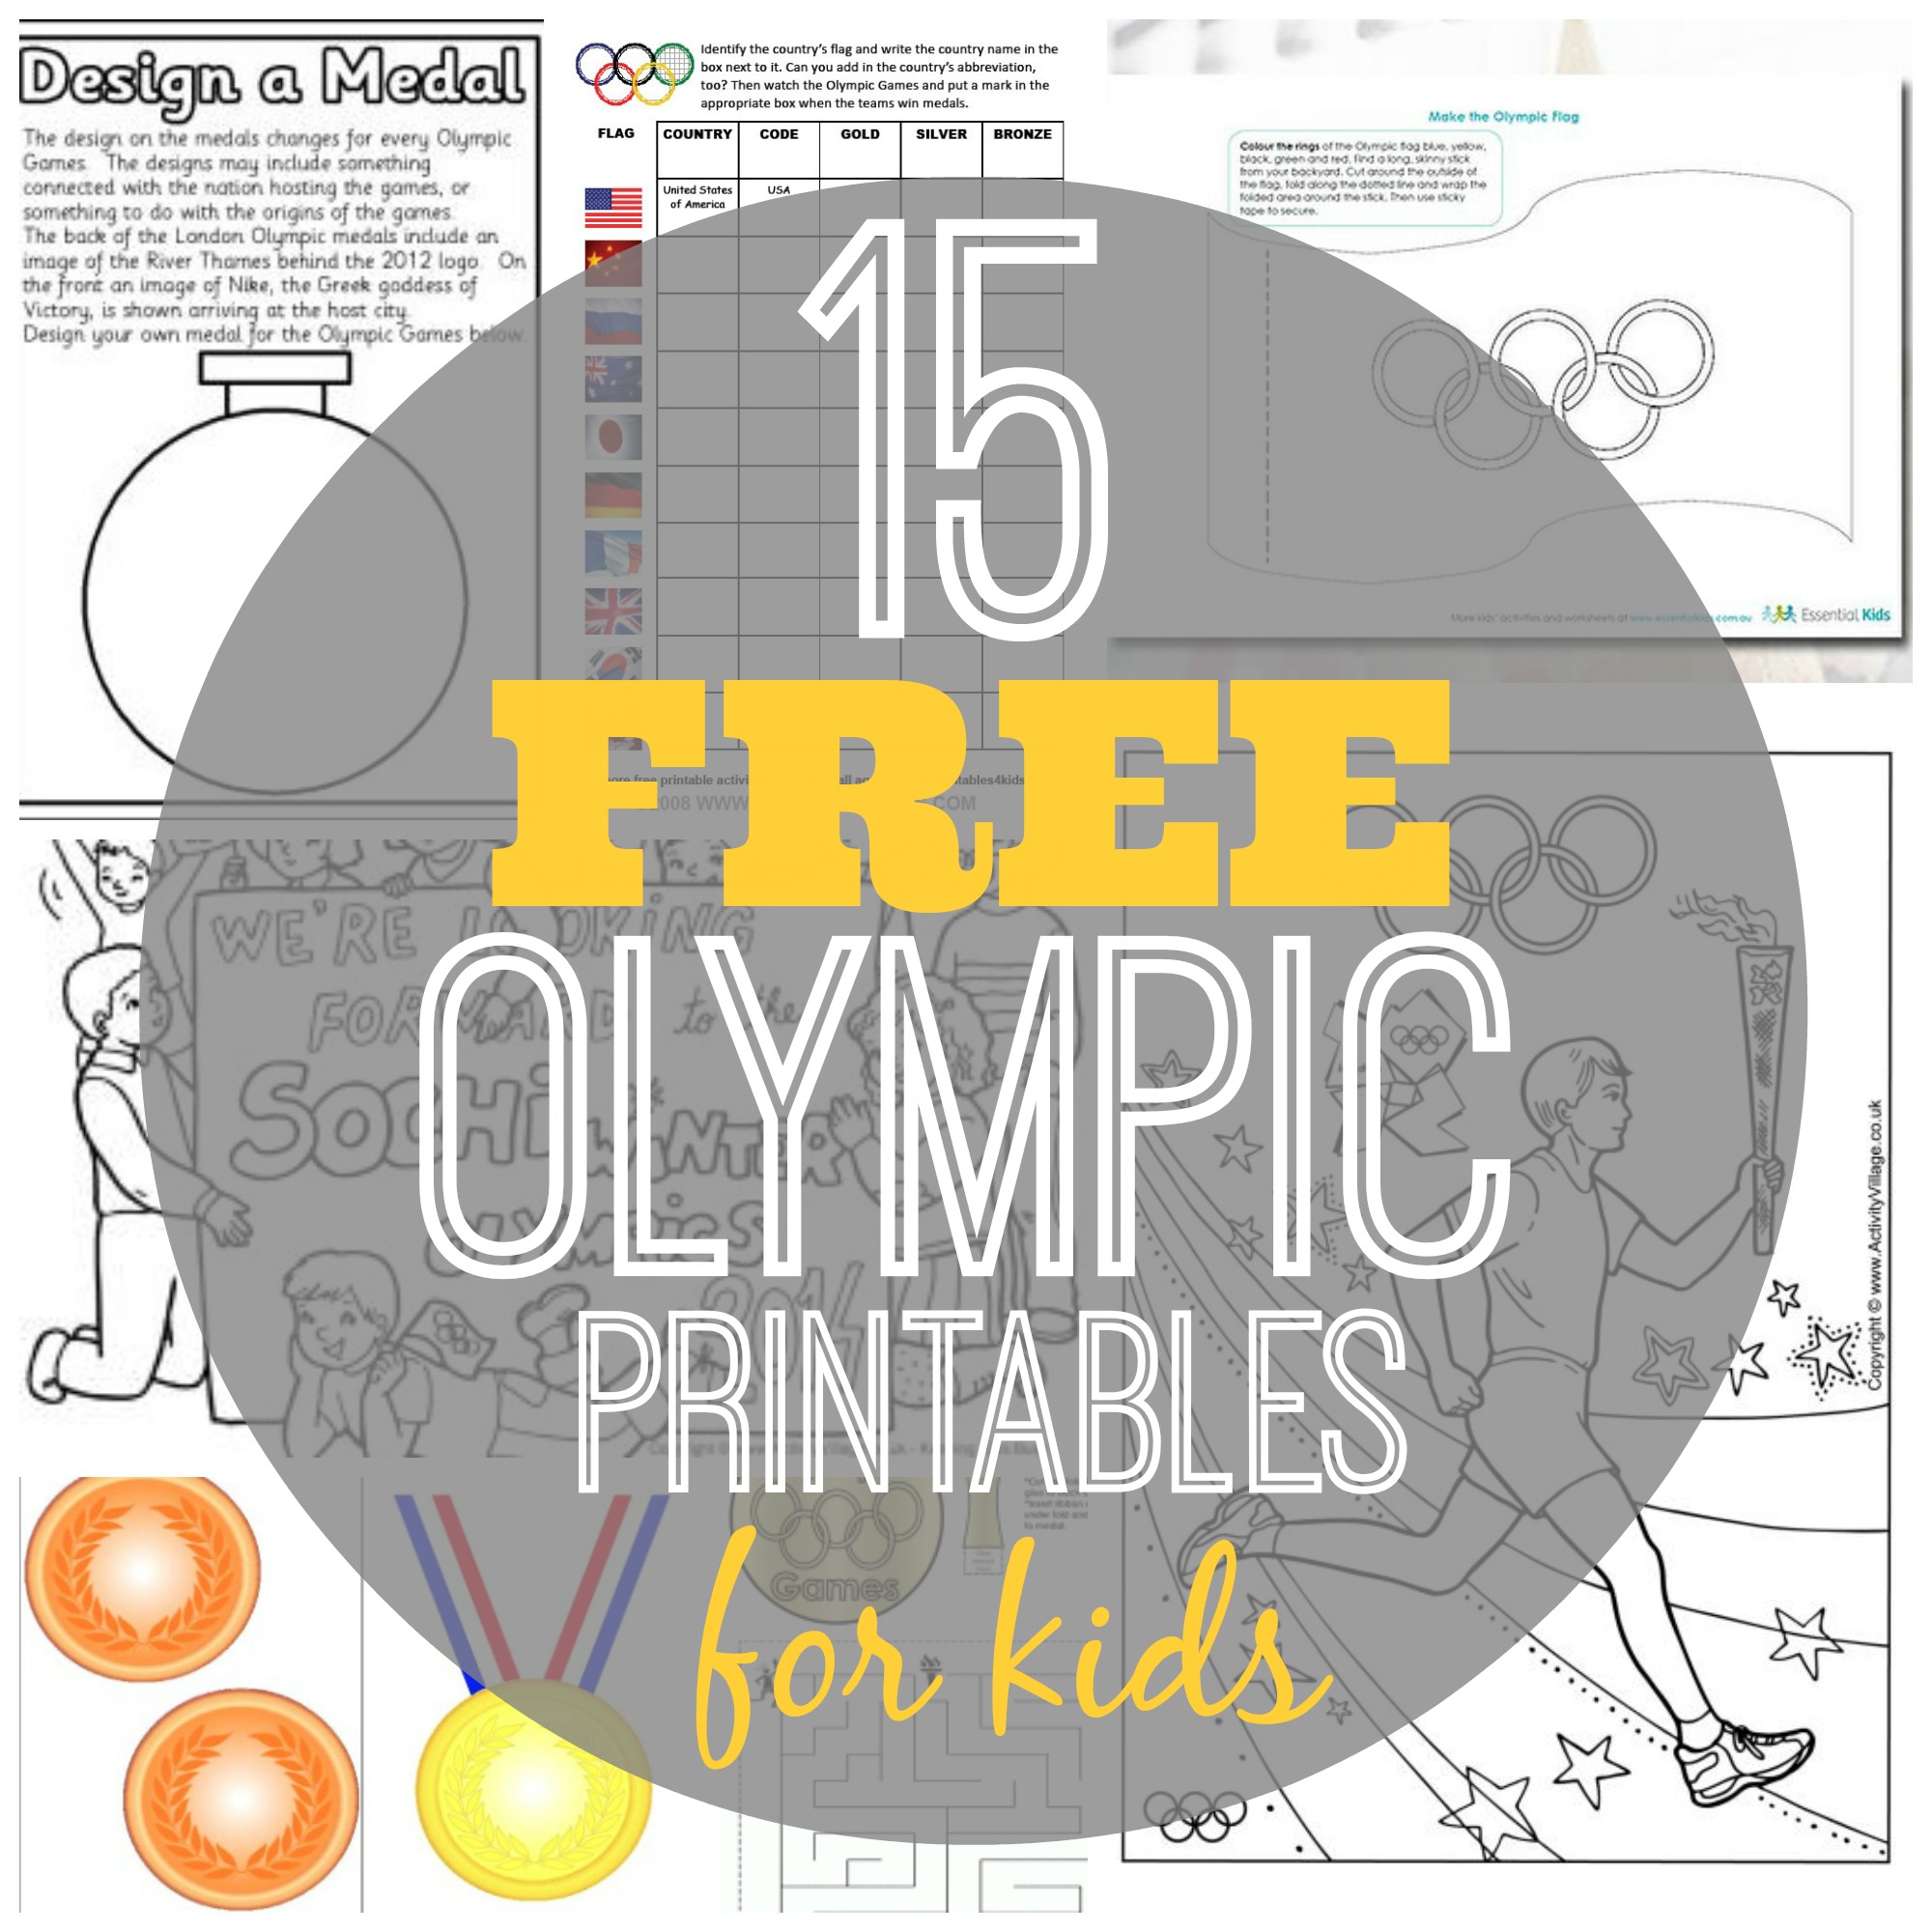 2018 olympics coloring pages